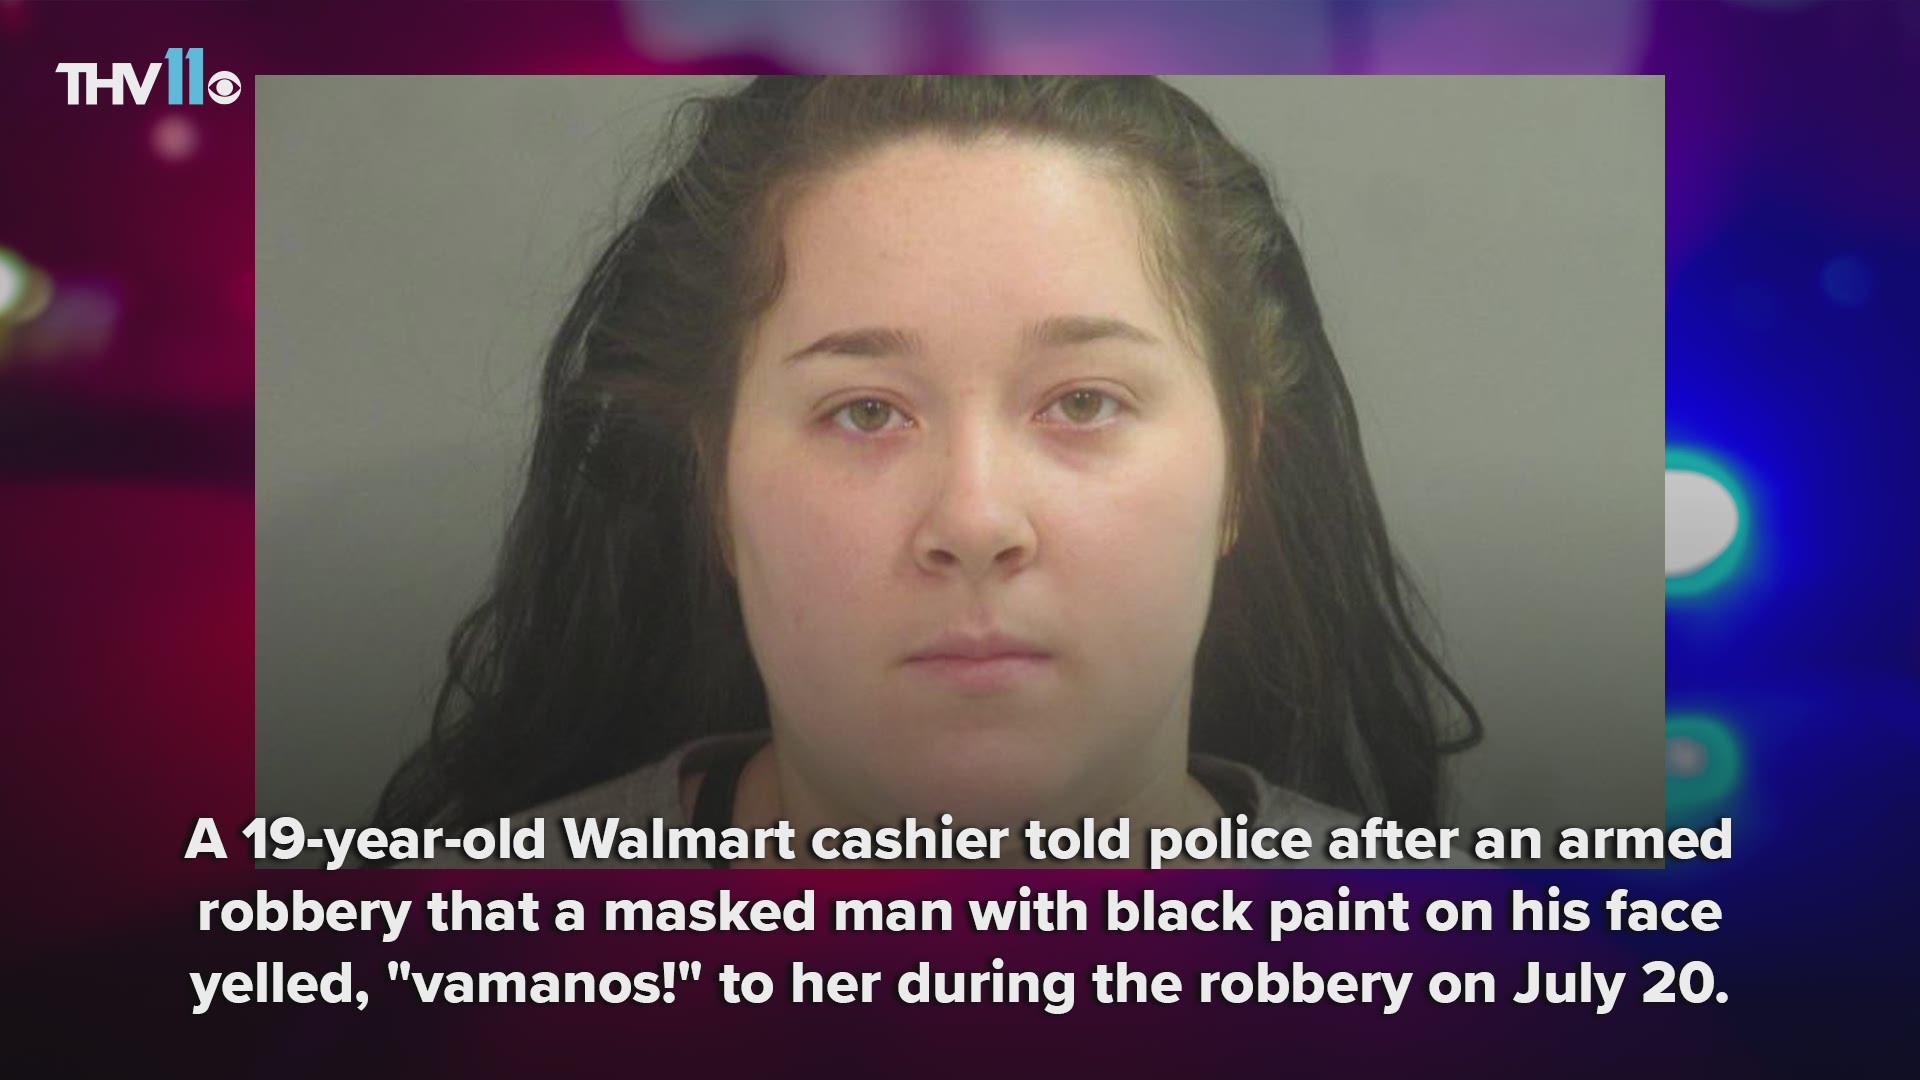 An Arkansas Walmart cashier planned a robbery then told police it was a Hispanic man